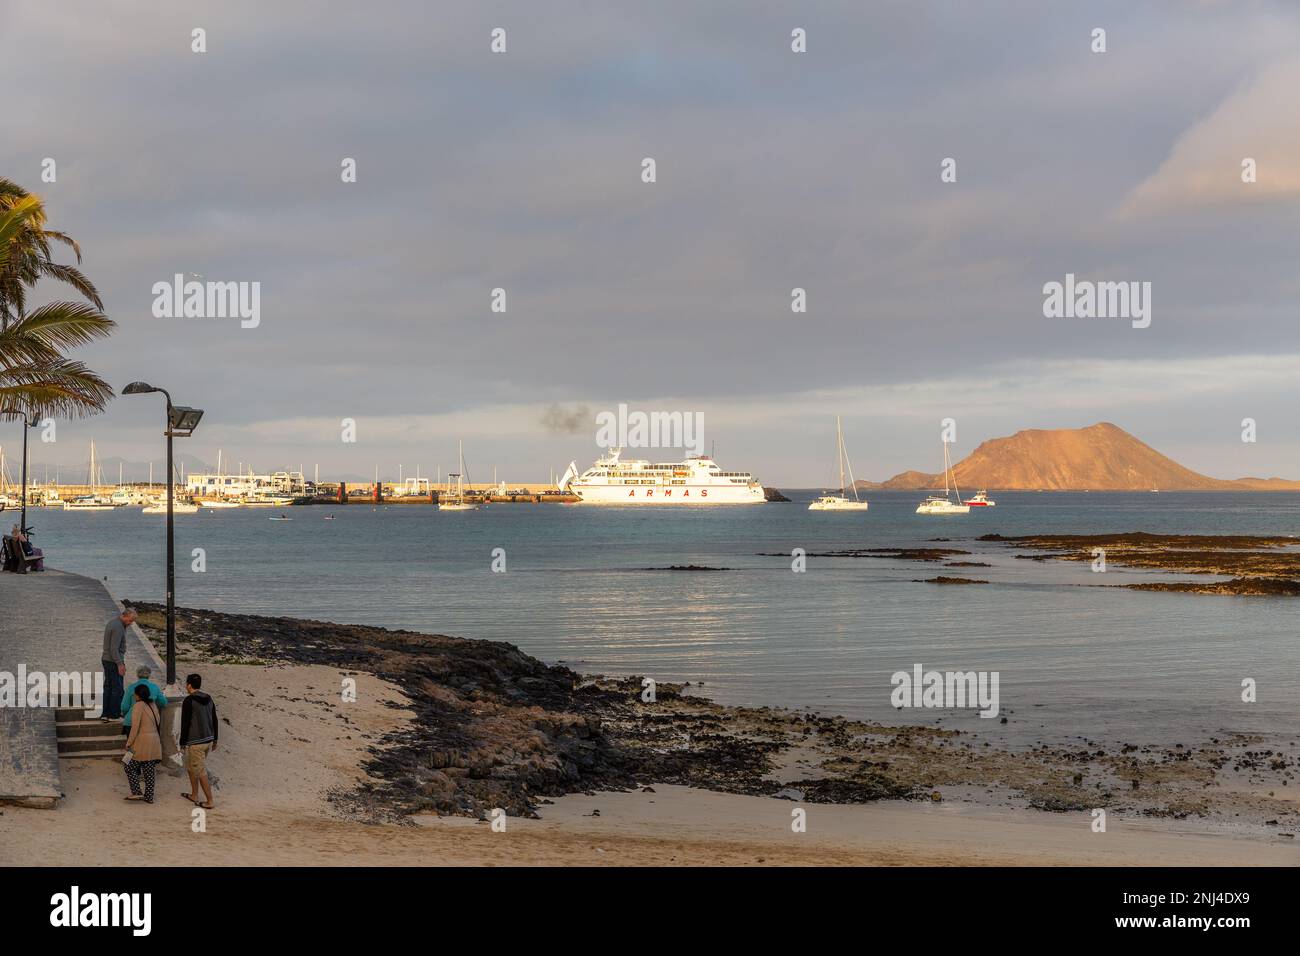 The bay of Corralejo with a view of the port and, in the distance, the island of wolves (Isla de los Lobos), Fuerteventura. Stock Photo